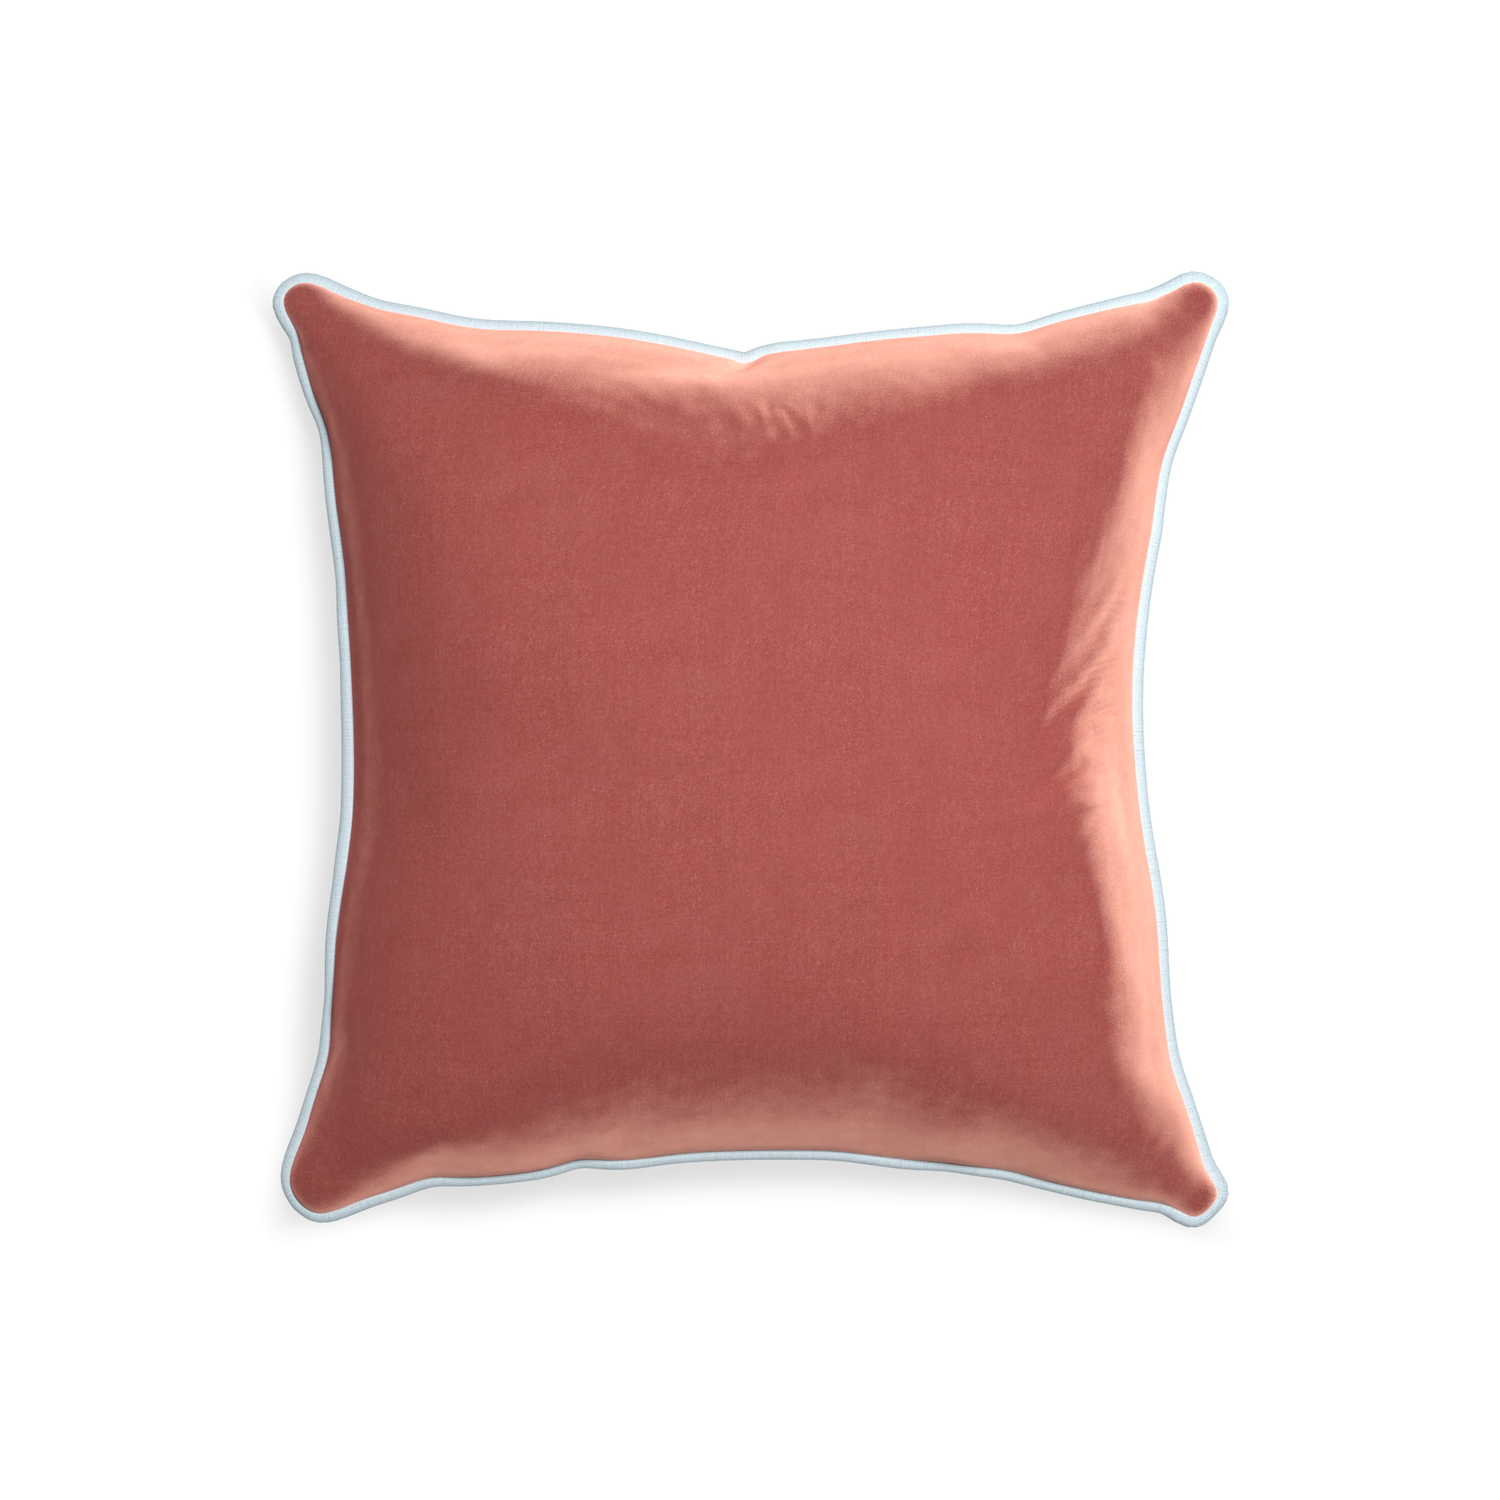 square coral velvet pillow with light blue piping